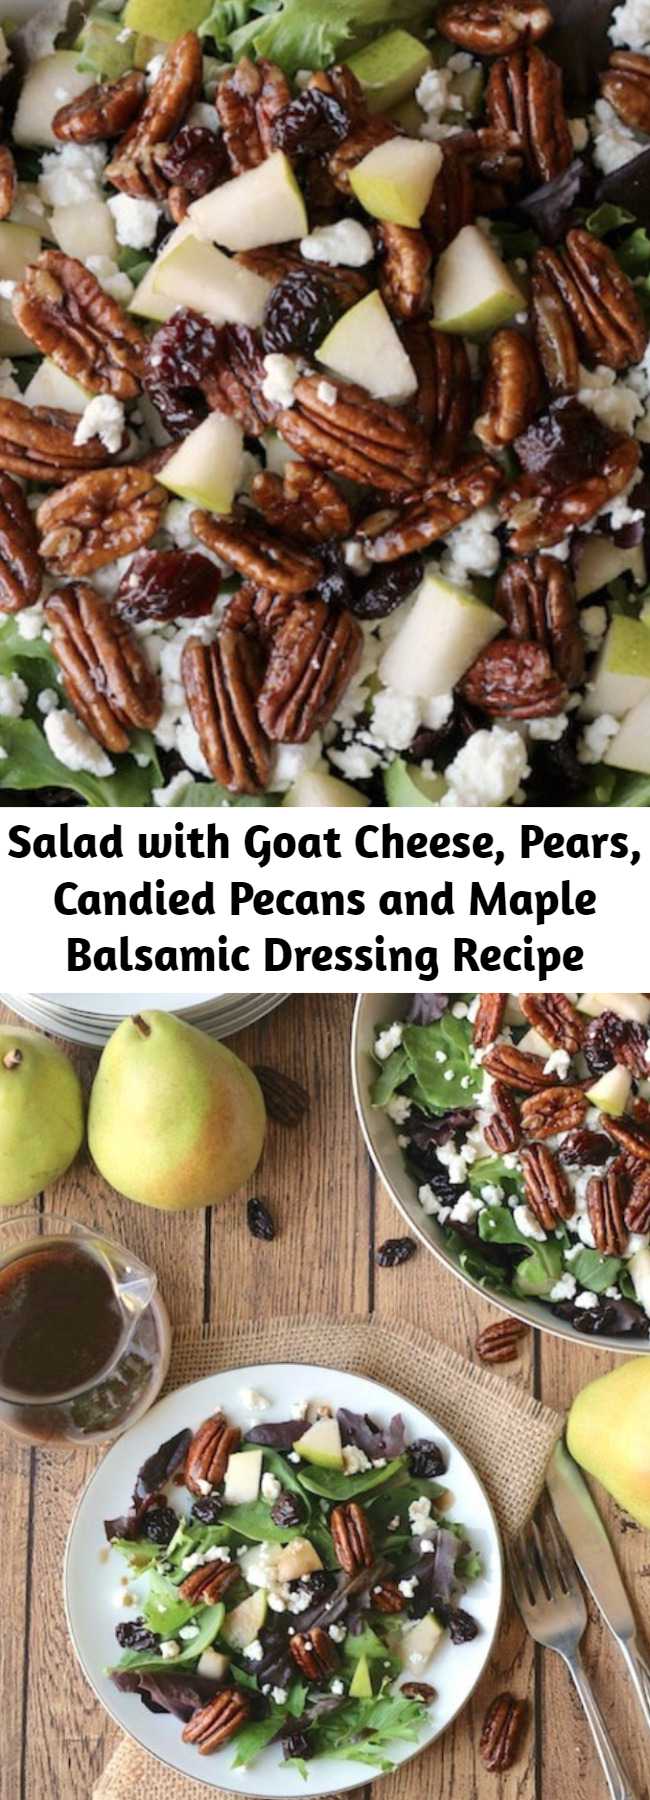 Salad with Goat Cheese, Pears, Candied Pecans and Maple Balsamic Dressing Recipe - An incredibly delicious, yet really easy salad recipe! An absolutely perfect Thanksgiving salad, or holiday salad for dinner parties ... but quick enough for family dinners, too!